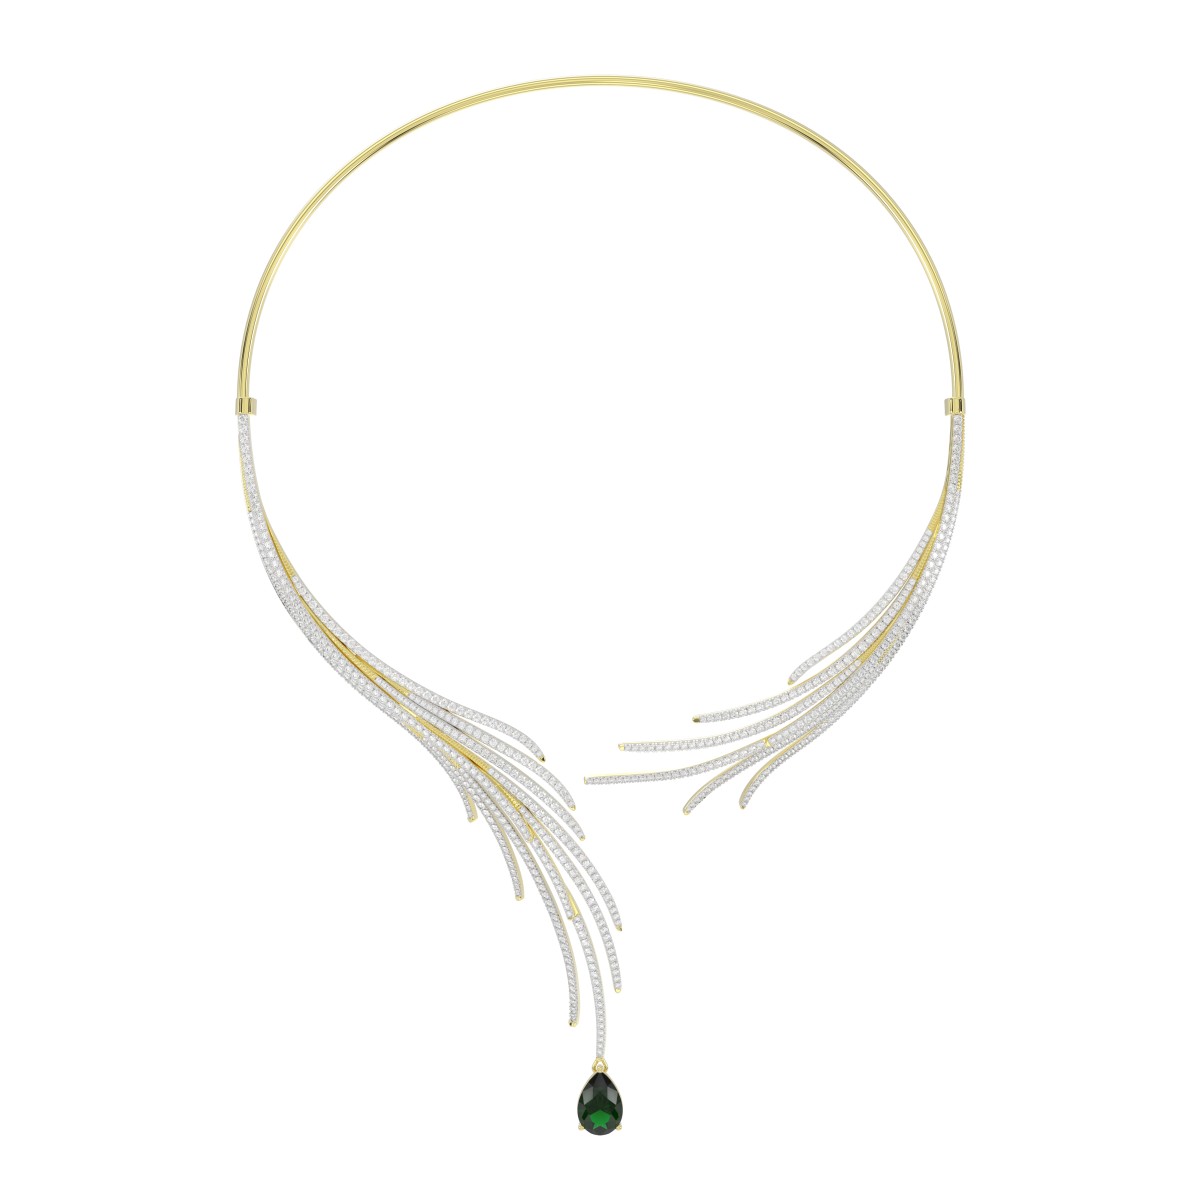 18K YELLOW GOLD 6CT ROUND/PEAR DIAMOND LADIES NECKLACE(COLOR STONE EMERALD/PEAR 4 1/6CT)